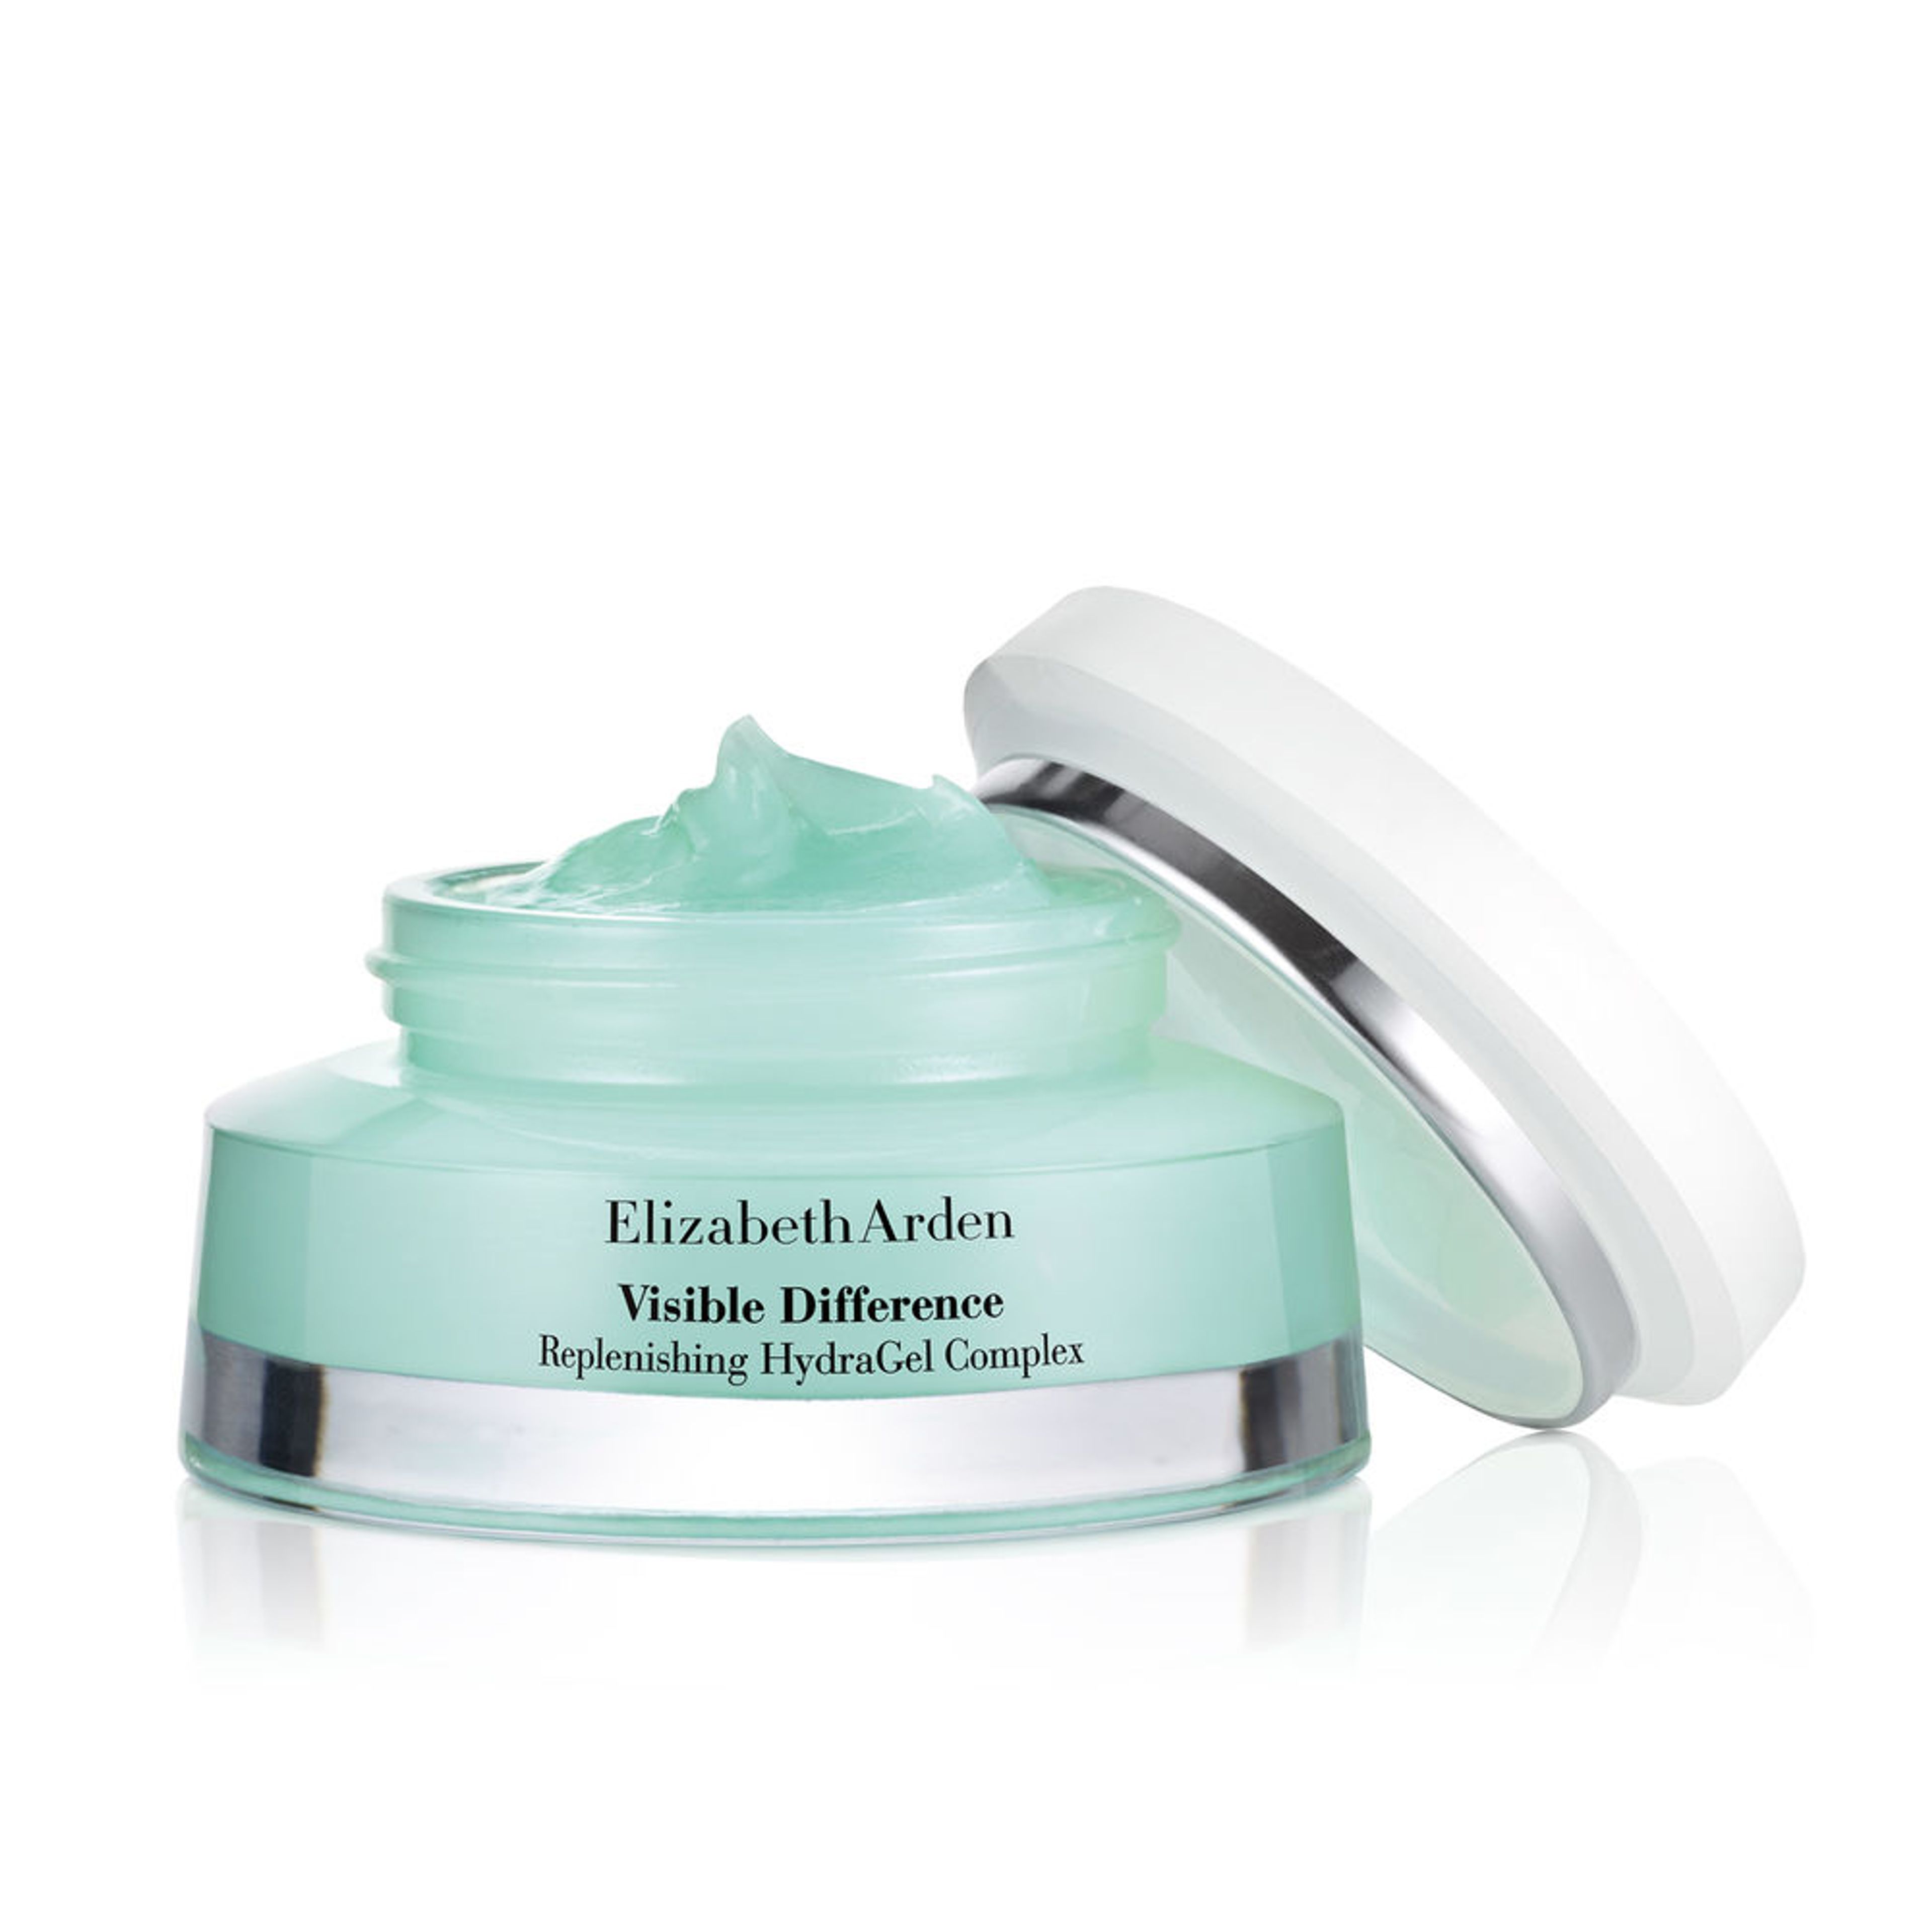 Elizabeth Arden Visible Difference Replenishing Hydragel Complex 1